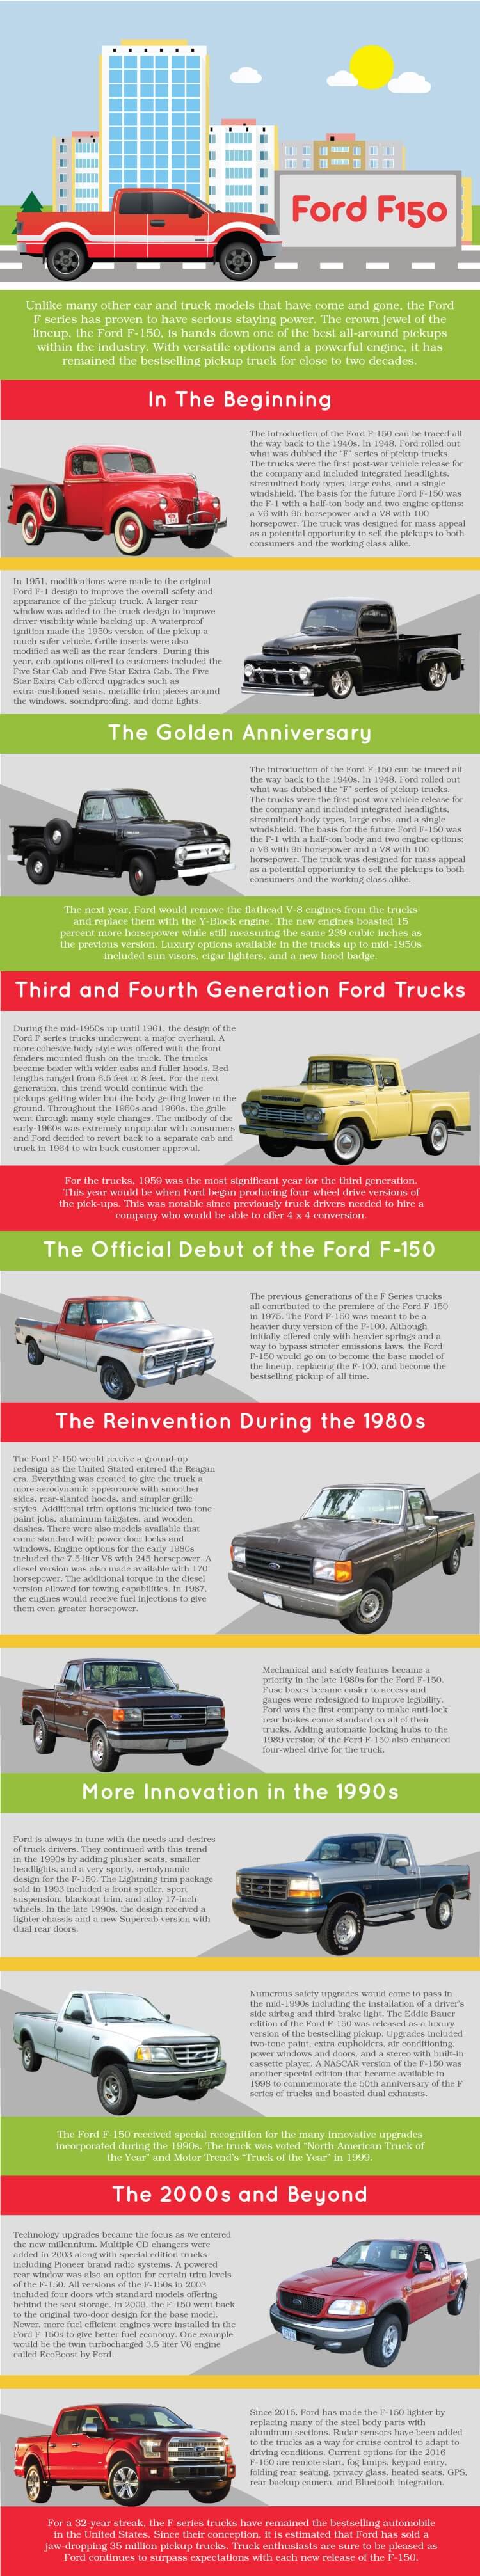 ford f150 infographic